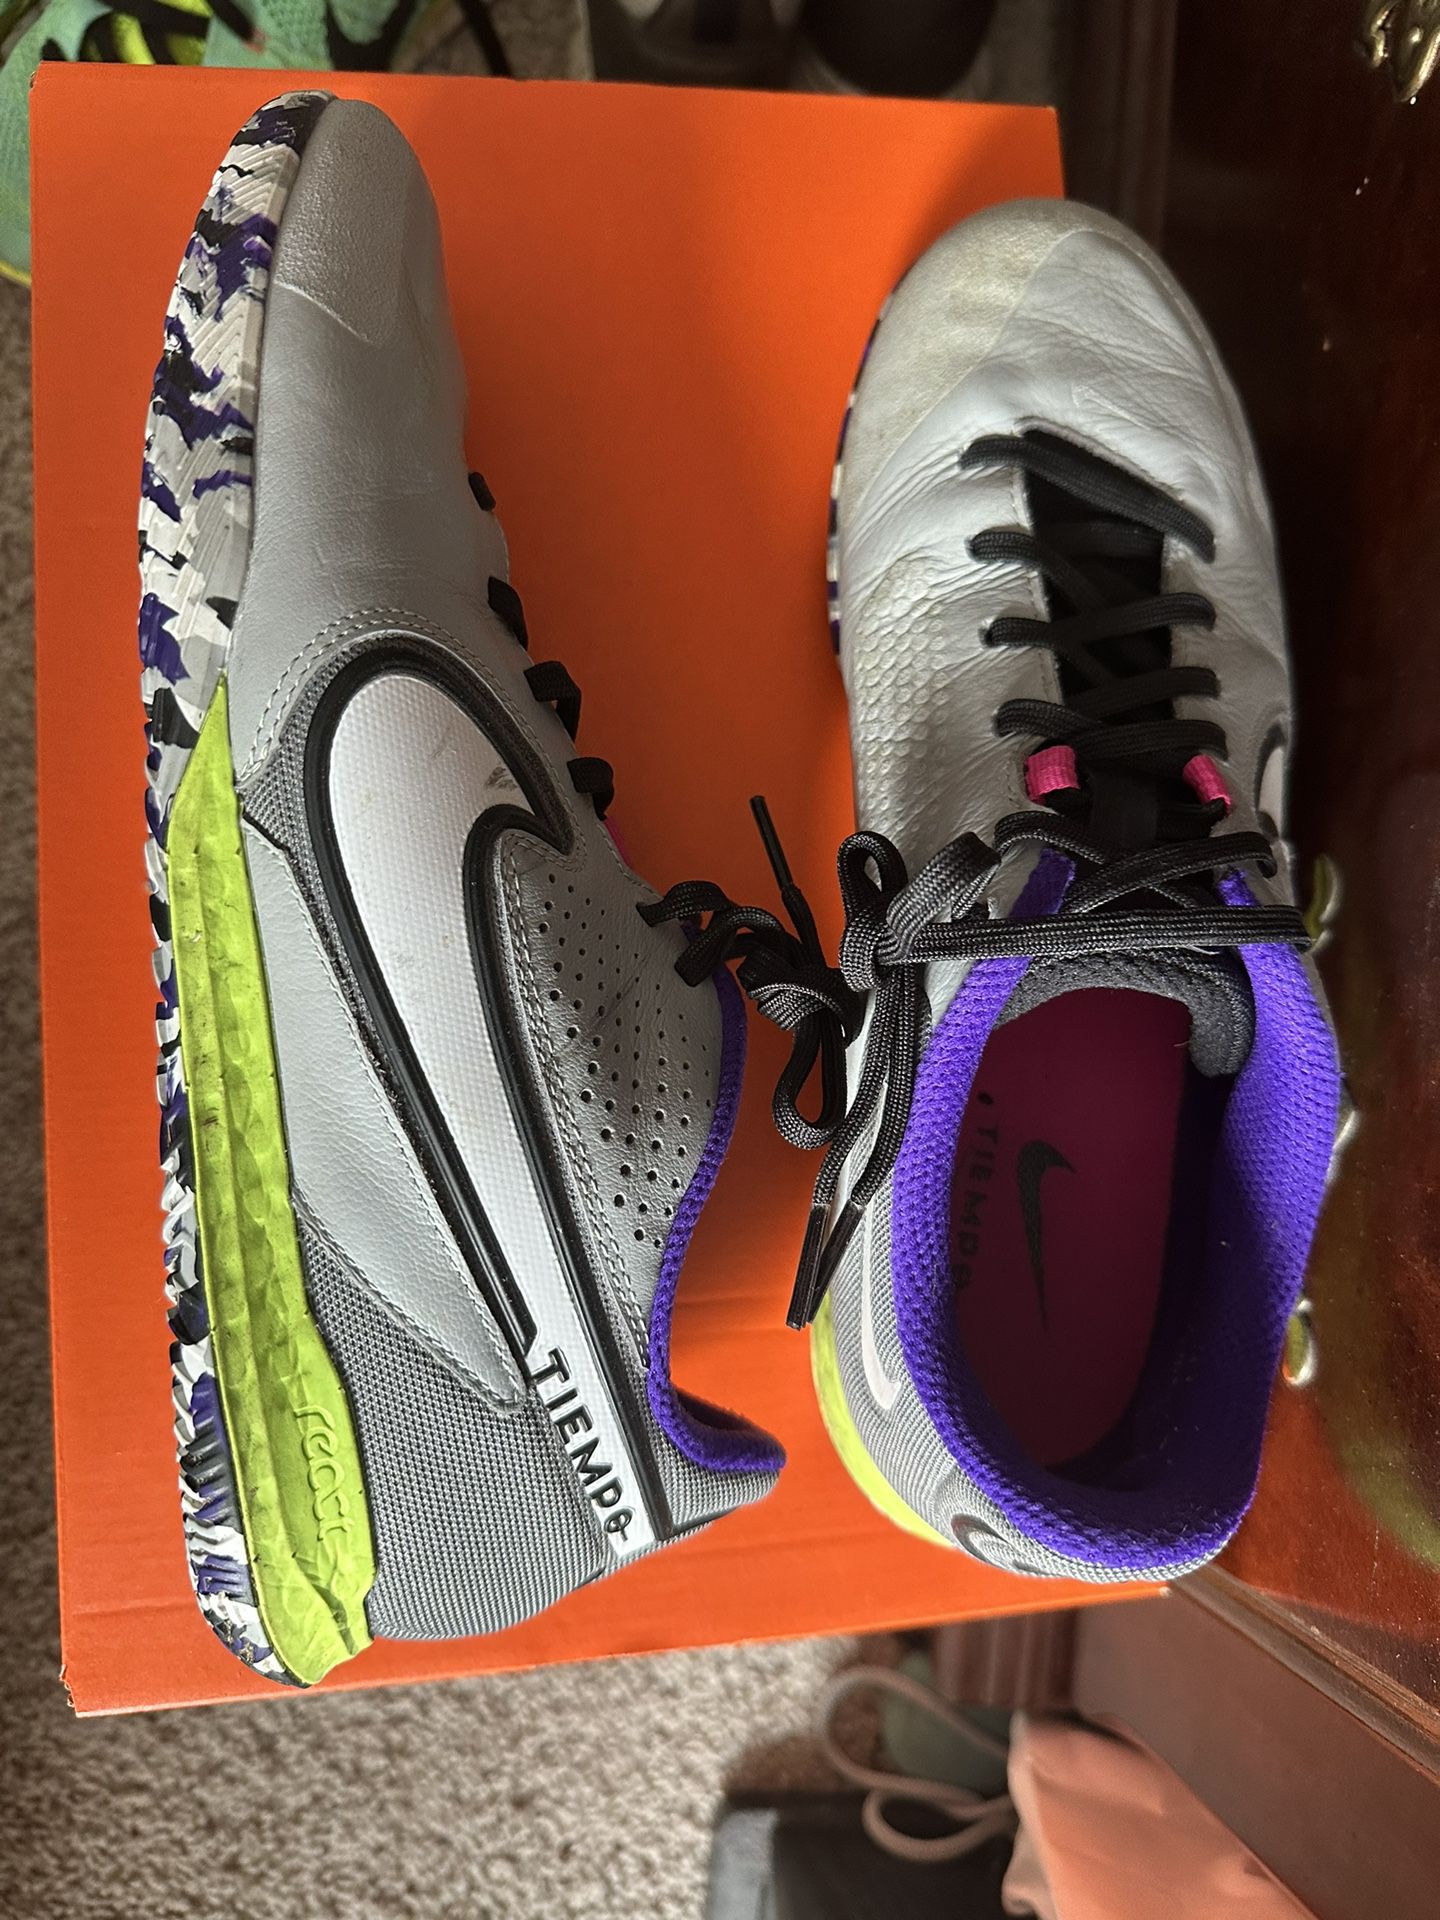 Nike Tiempo Indoor Soccer Shoes Size 8.5 Pre-Owned.